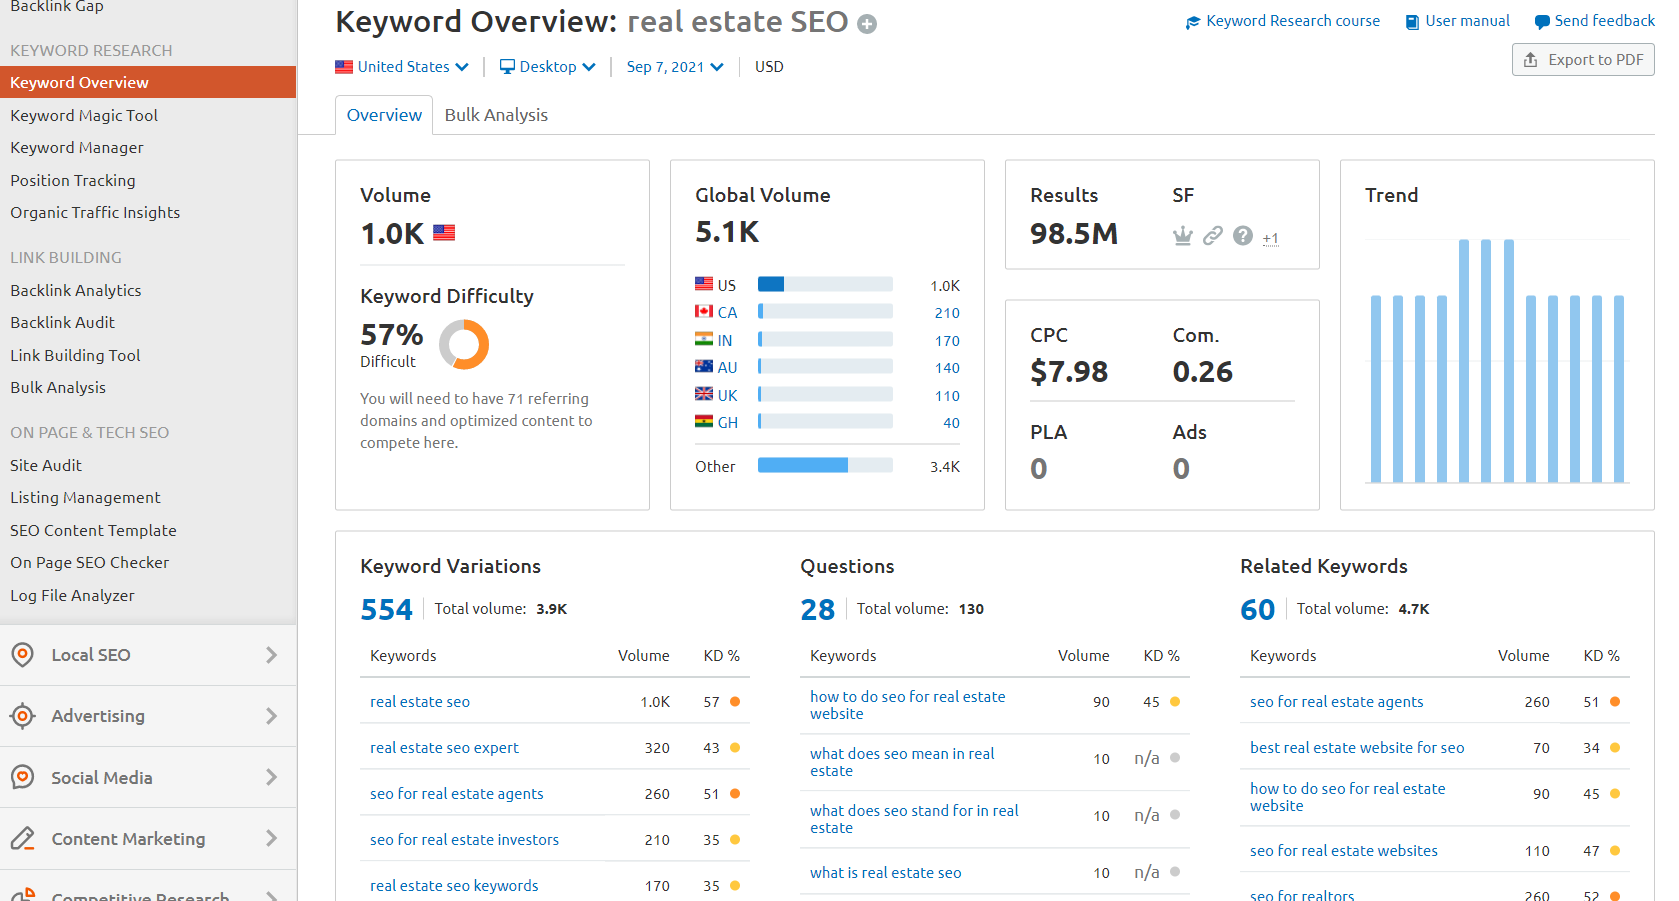 Keyword Research results for real estate SEO.